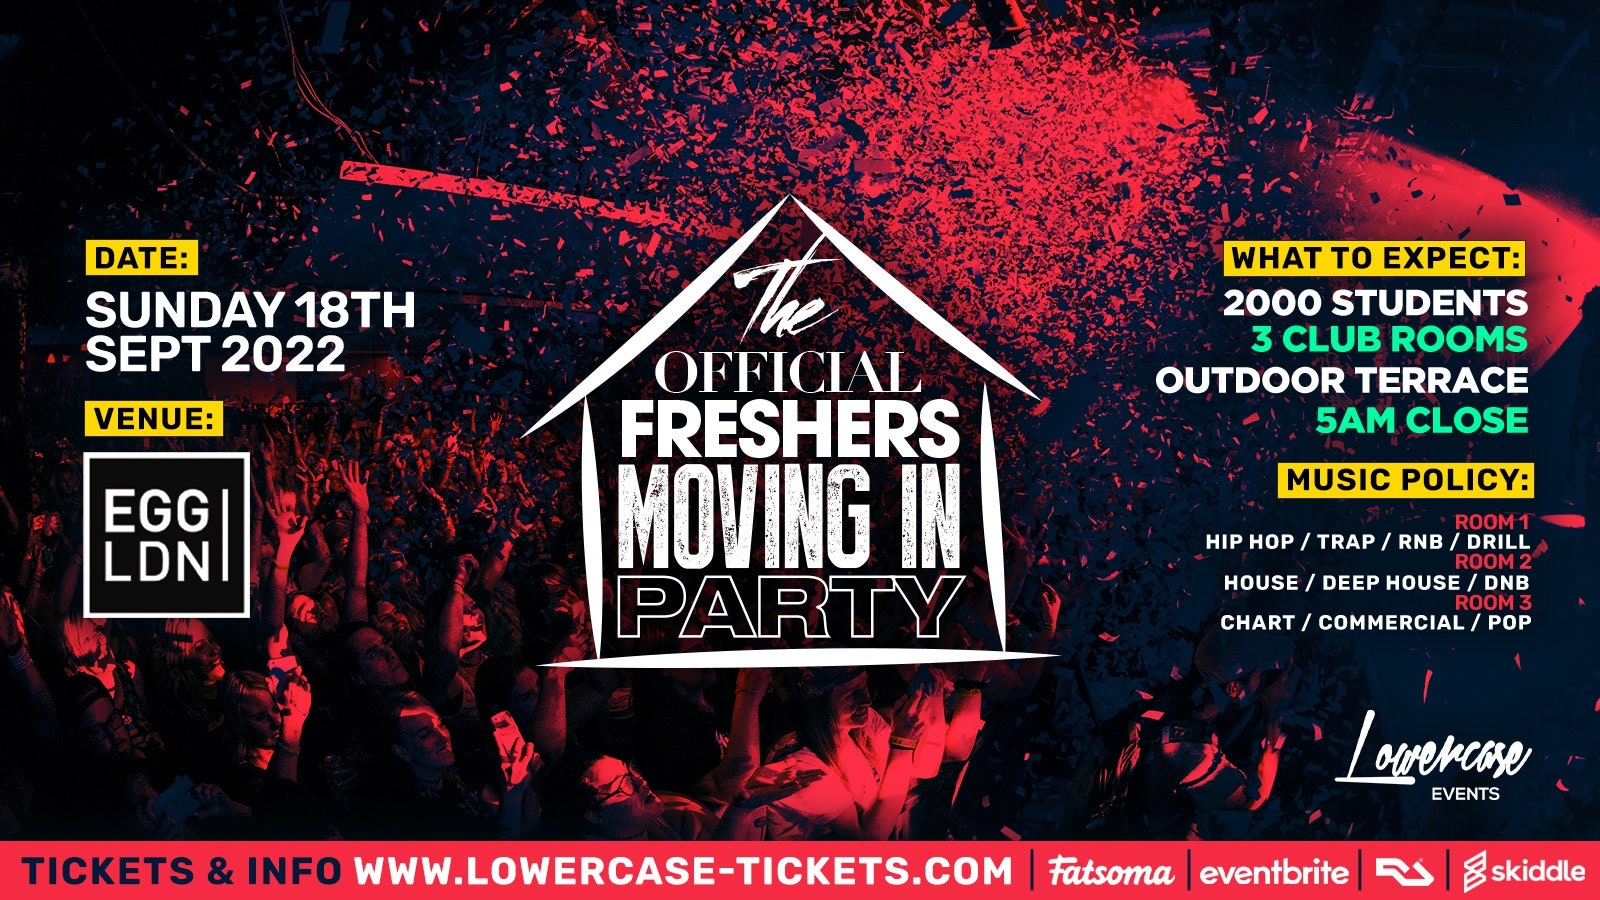 THE OFFICIAL LONDON FRESHERS MOVING IN PARTY @ EGG LONDON – LONDON FRESHERS WEEK 2022 [FRESHERS WEEK 1]